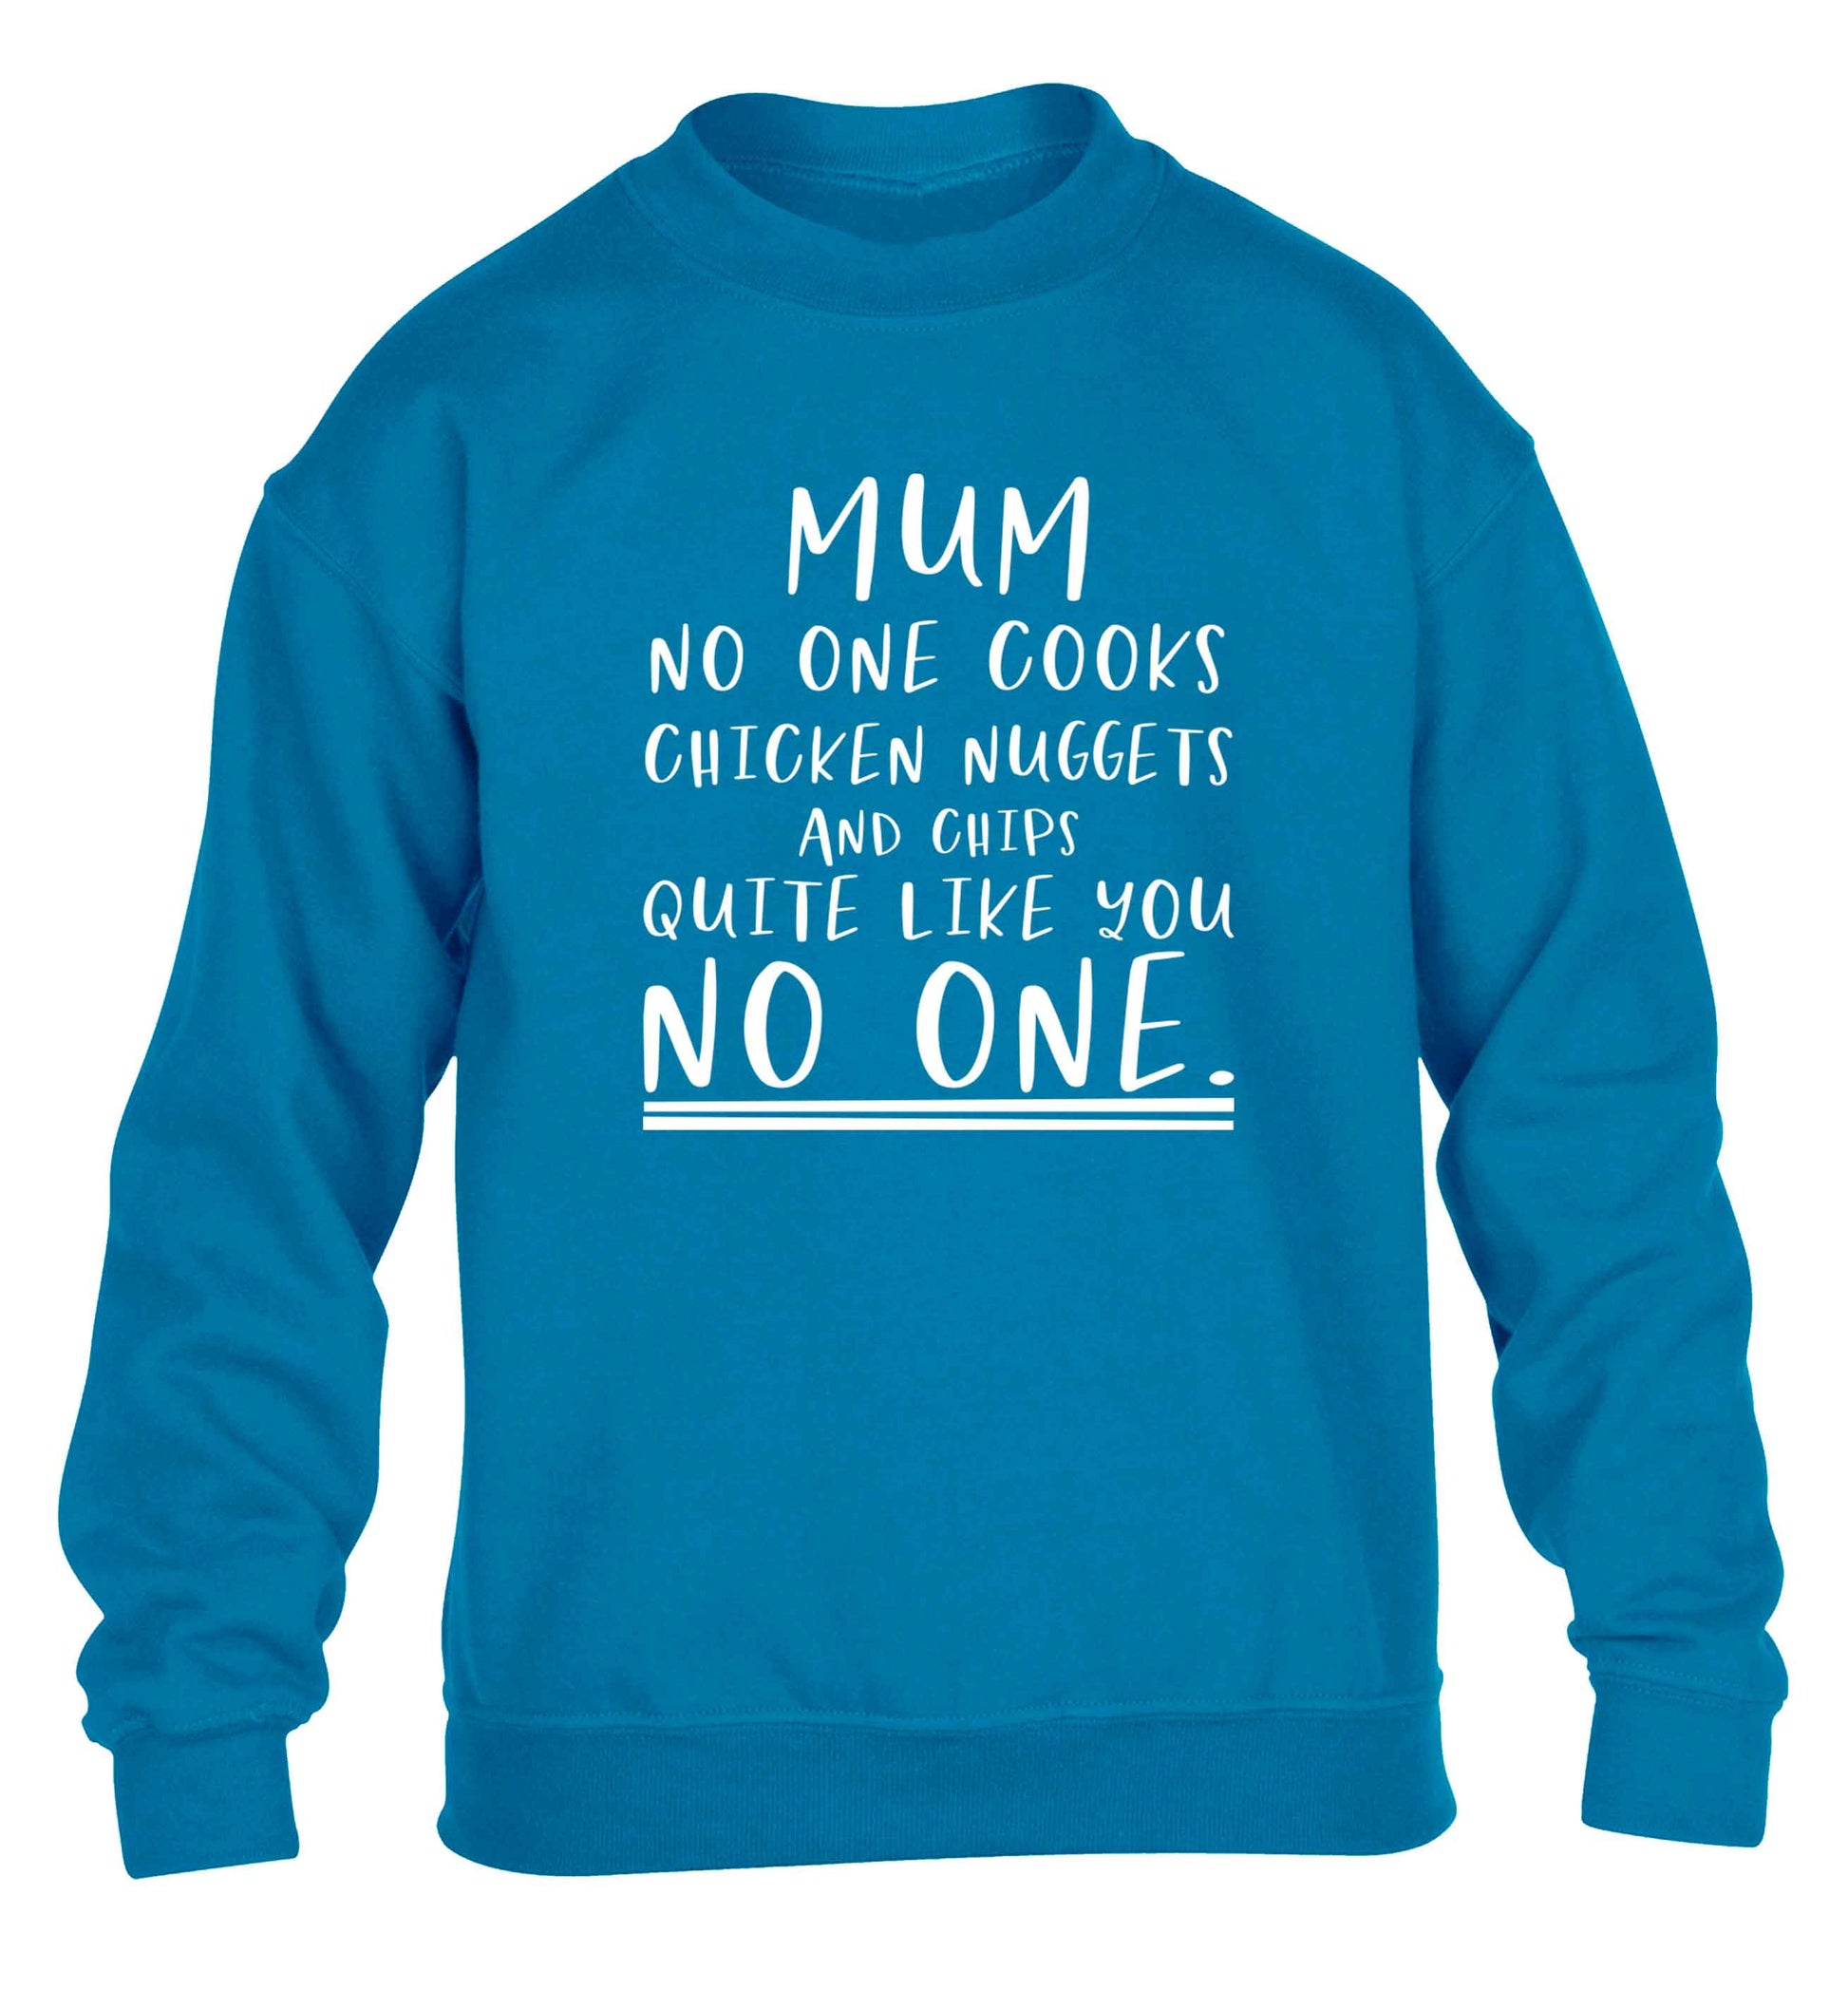 Super funny sassy gift for mother's day or birthday!  Mum no one cooks chicken nuggets and chips like you no one children's blue sweater 12-13 Years